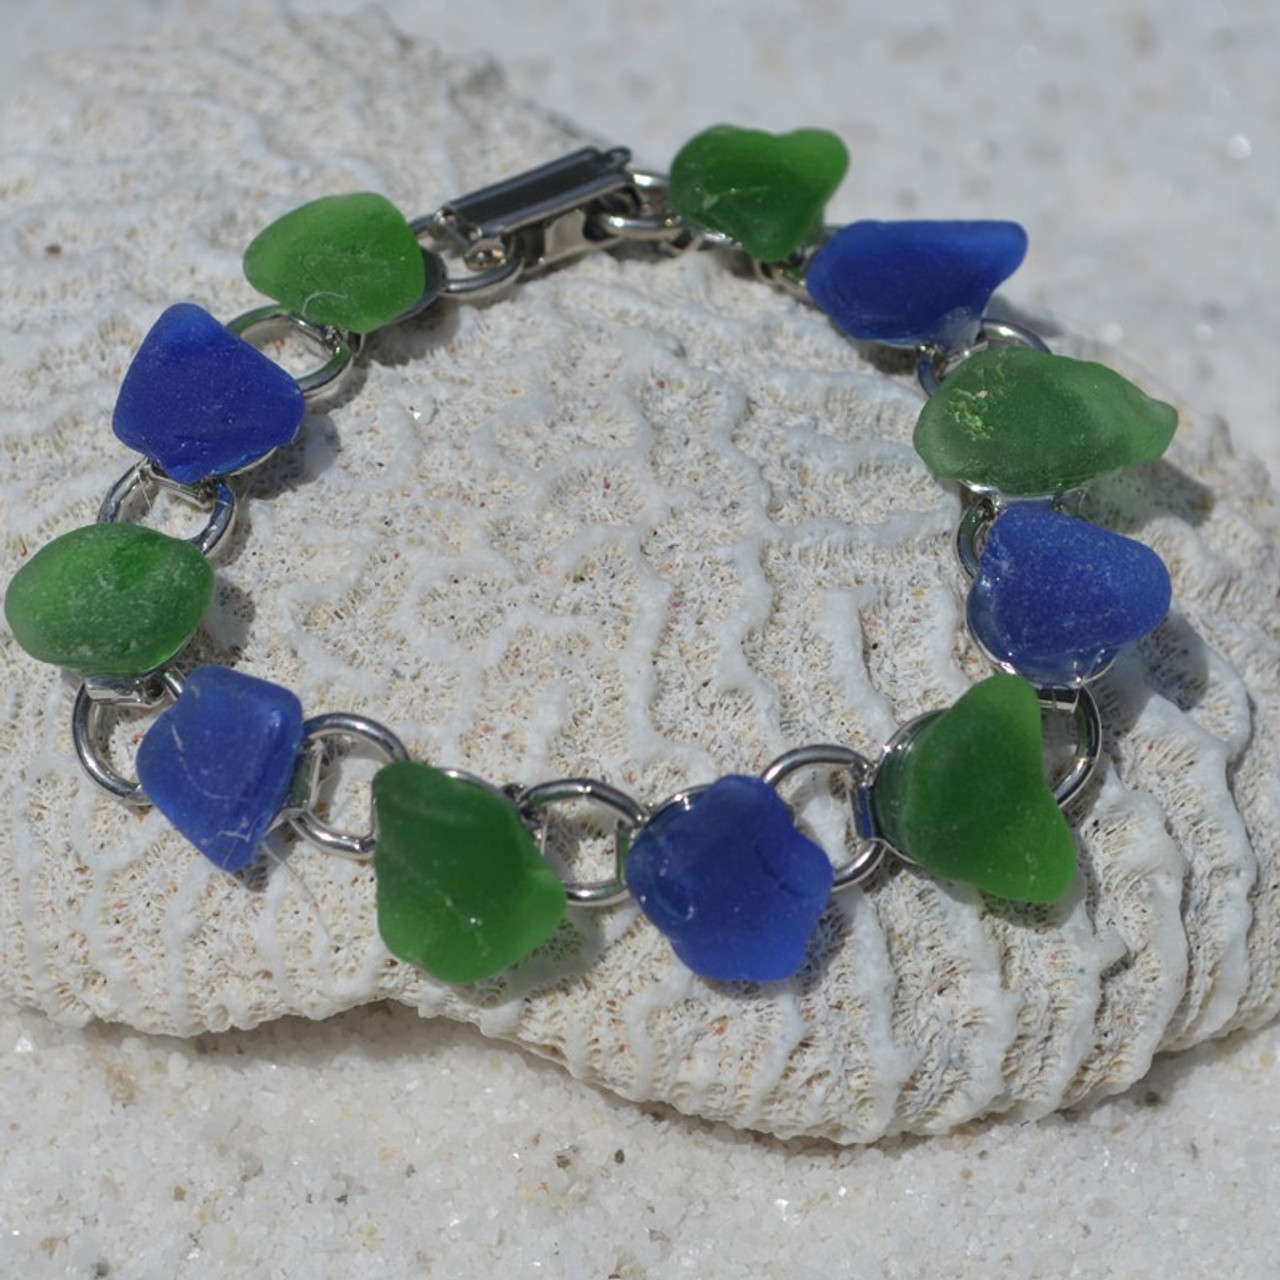 Genuine Surf Tumbled Frosted Green and Cobalt Blue Sea Glass Bracelet - 3 Size Options - Made to Order